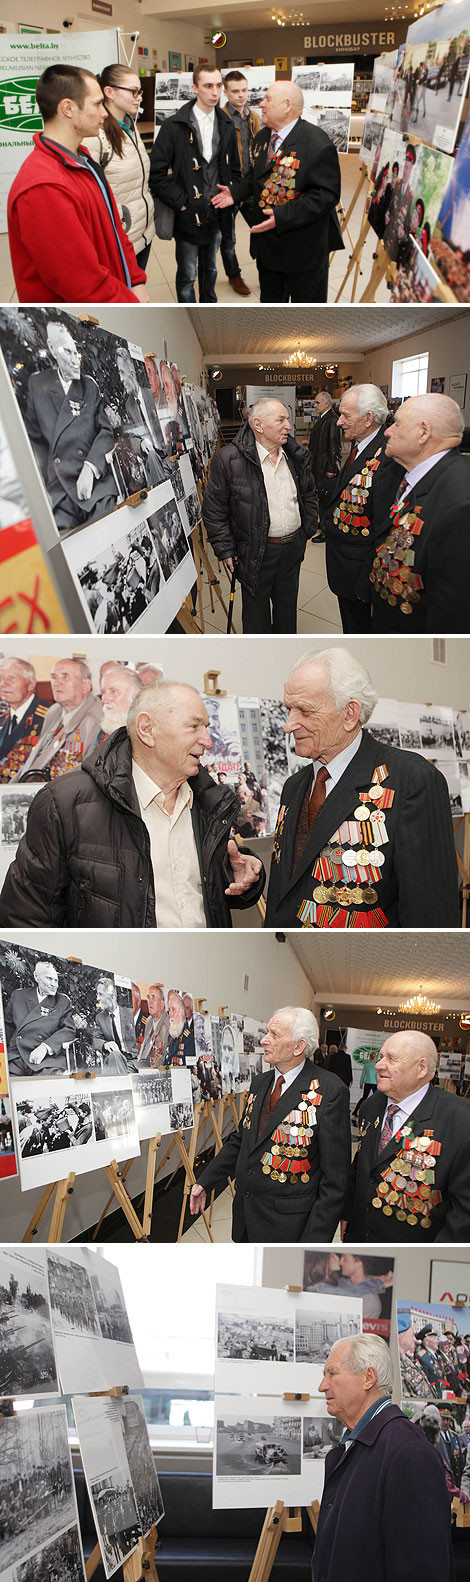 BelTA’s photo exhibition One Victory for All in Mogilev